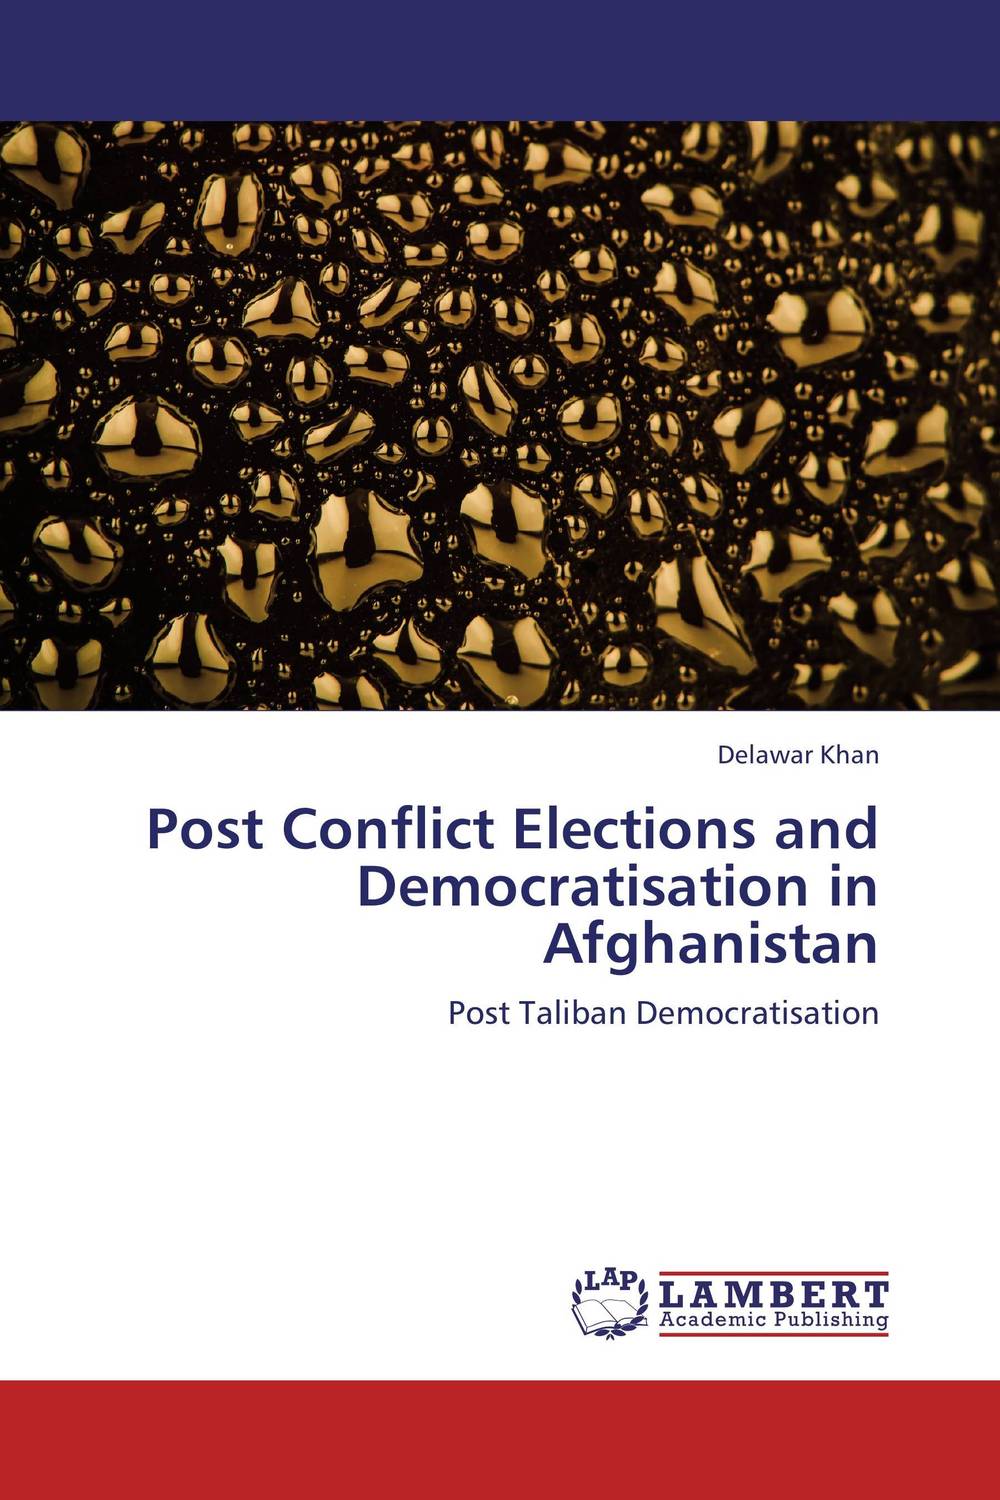 Post Conflict Elections and Democratisation in Afghanistan